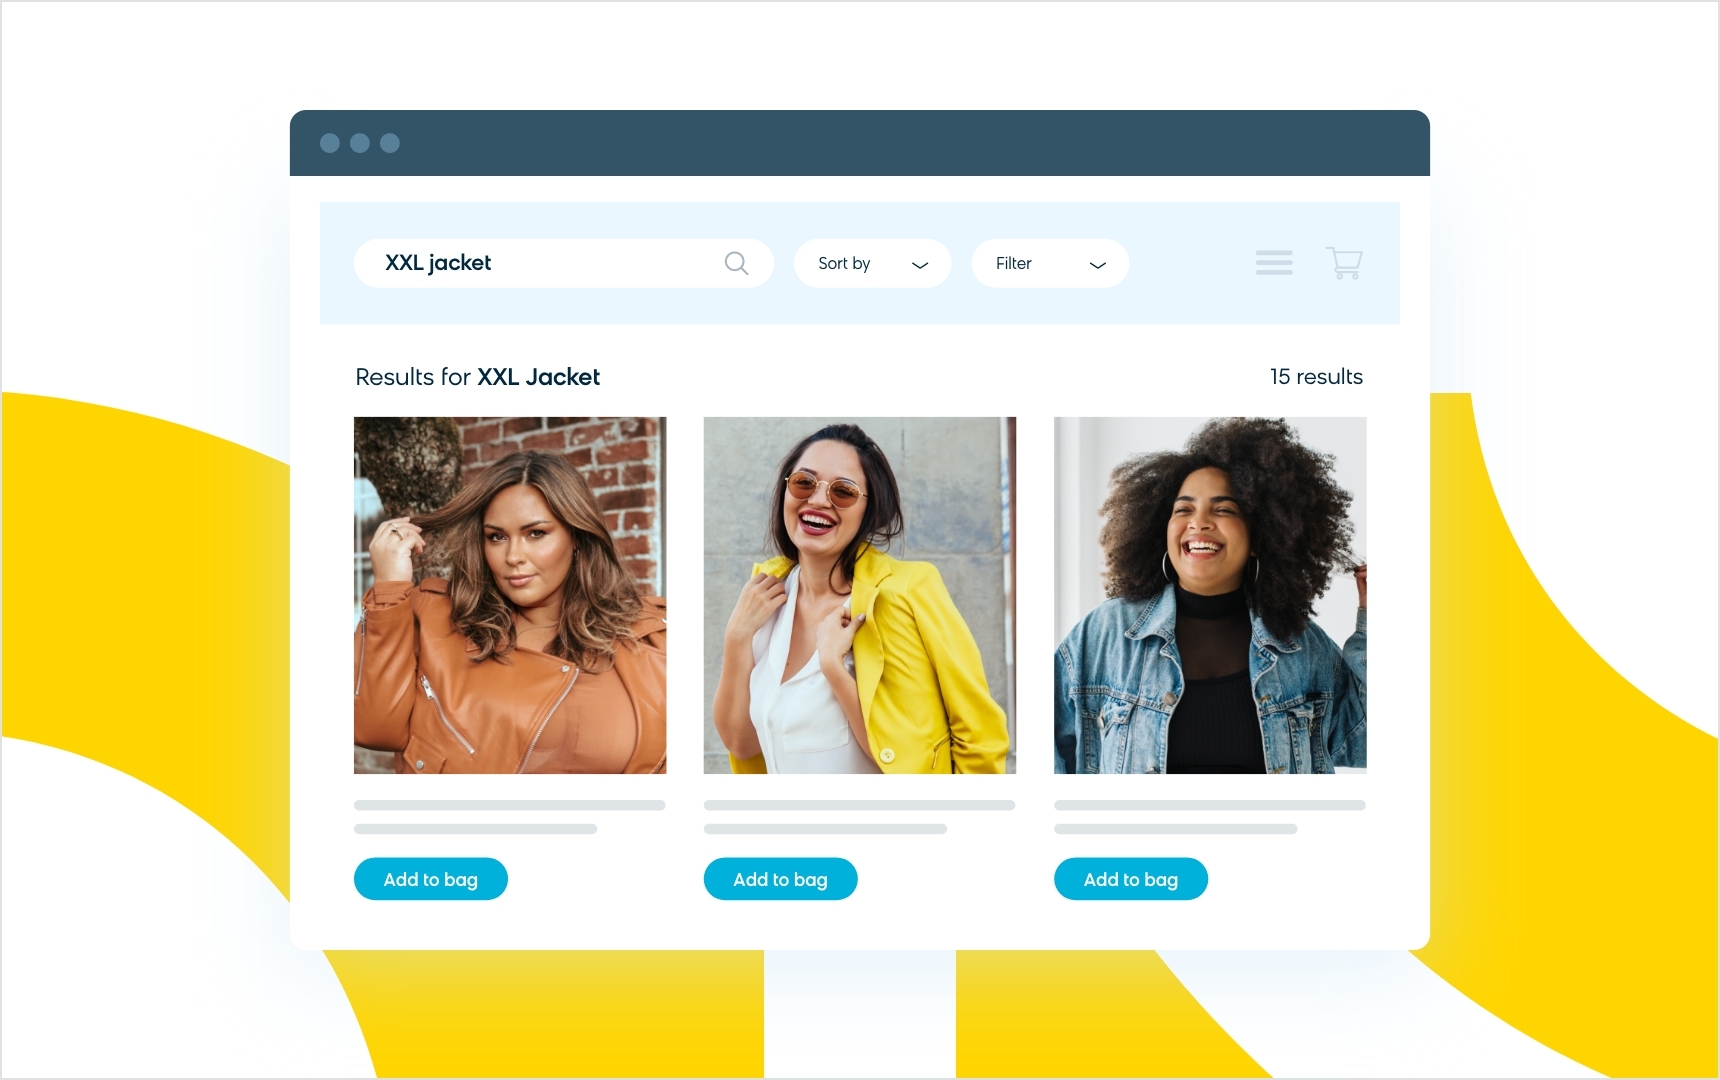 Example of Bloomreach Discovery SKU Select automatically showing models wearing XXL jackets to match the search